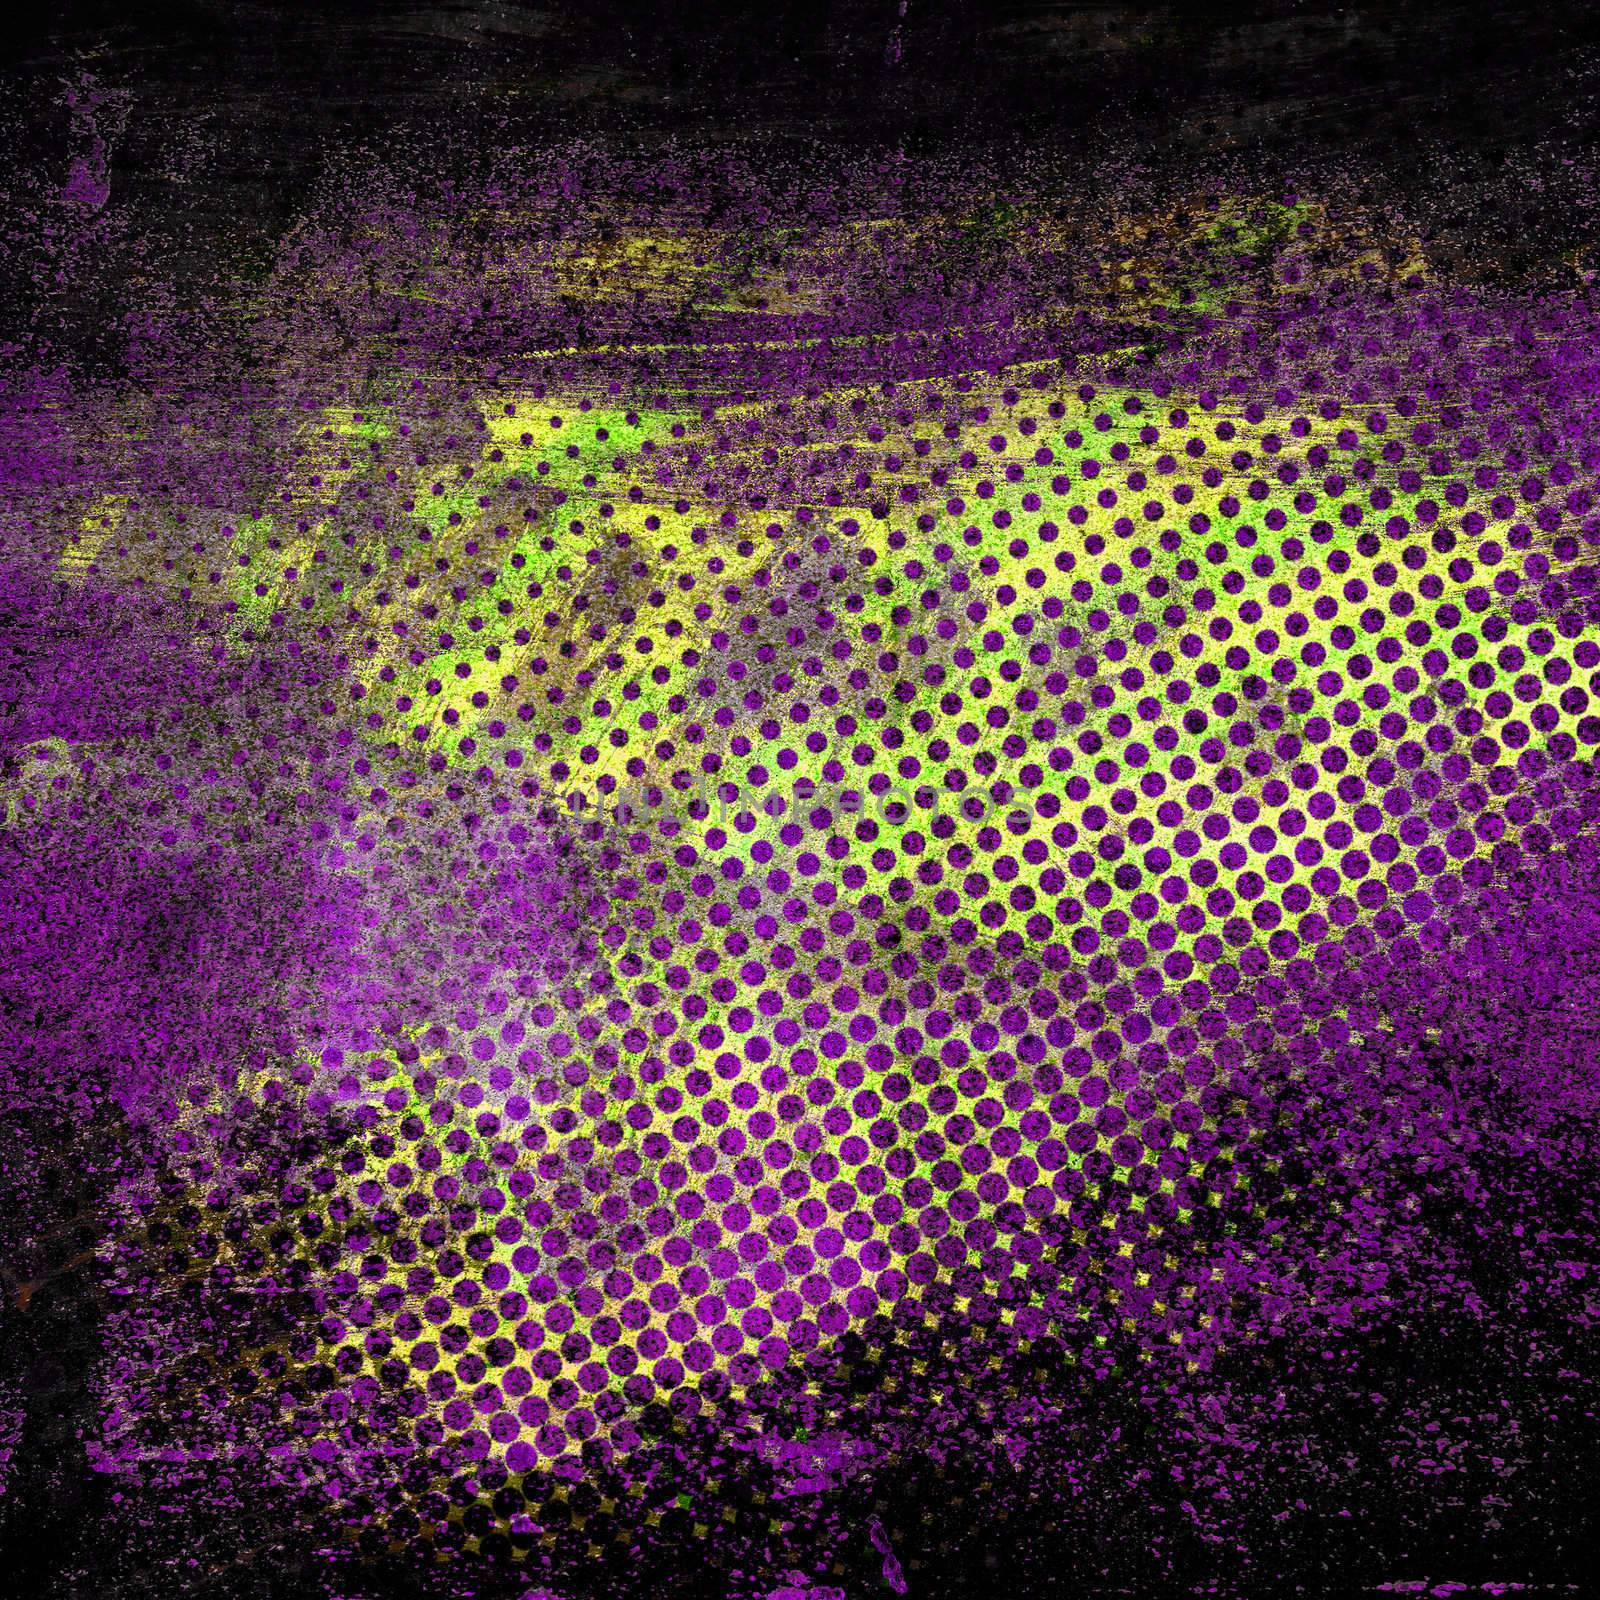 Abstract grunge texture with a black background. great for overlays and backgrounds.